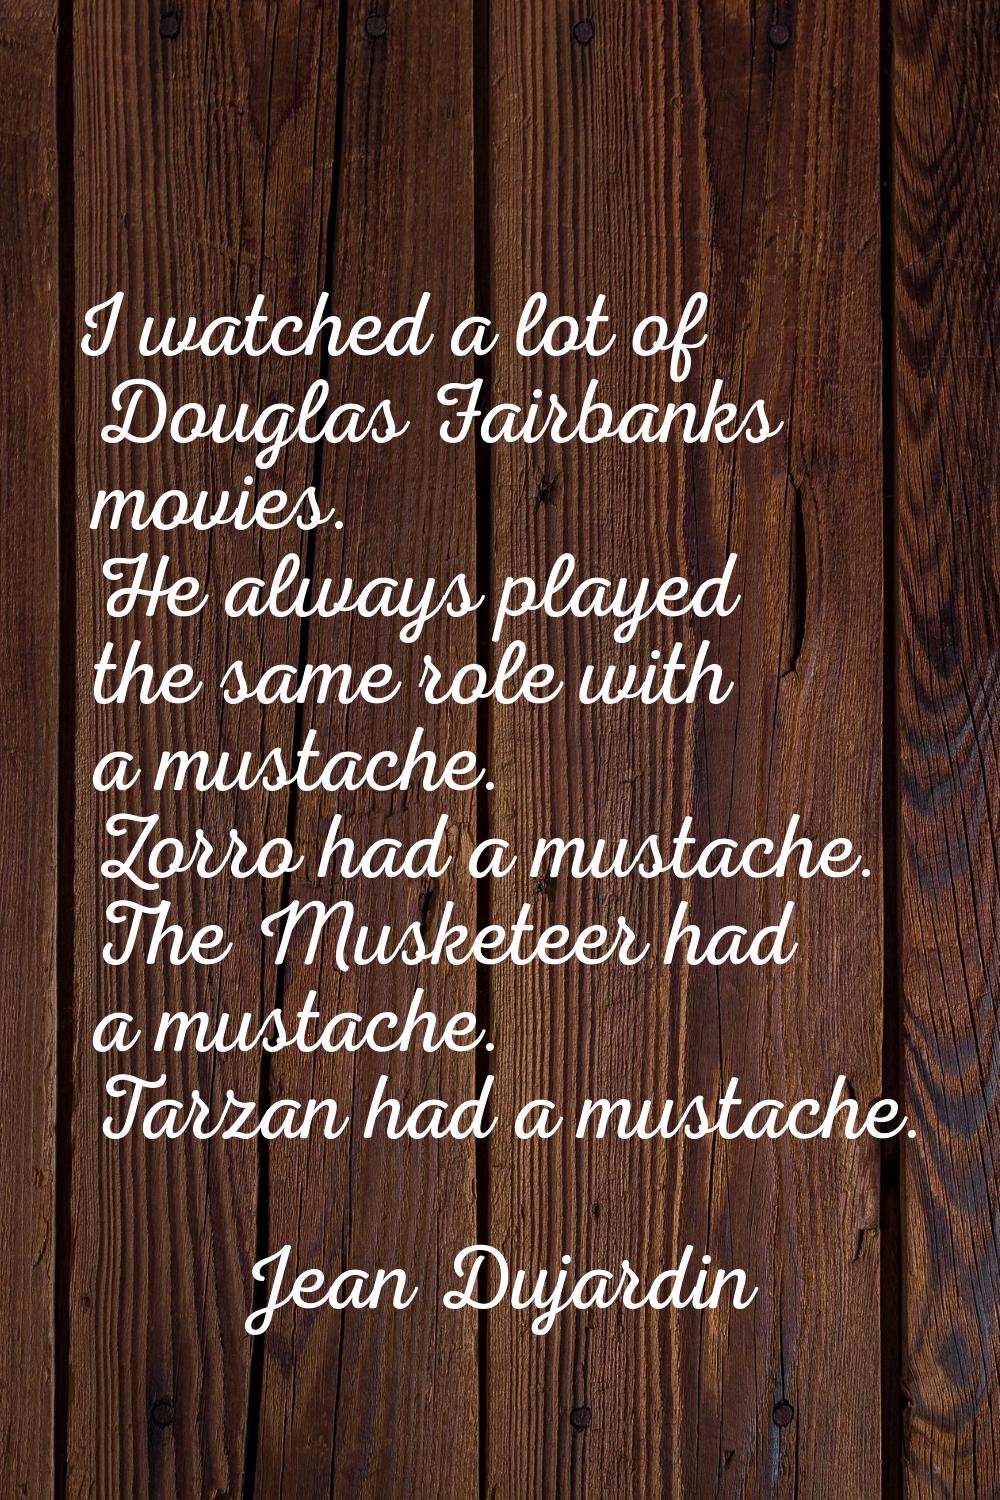 I watched a lot of Douglas Fairbanks movies. He always played the same role with a mustache. Zorro 